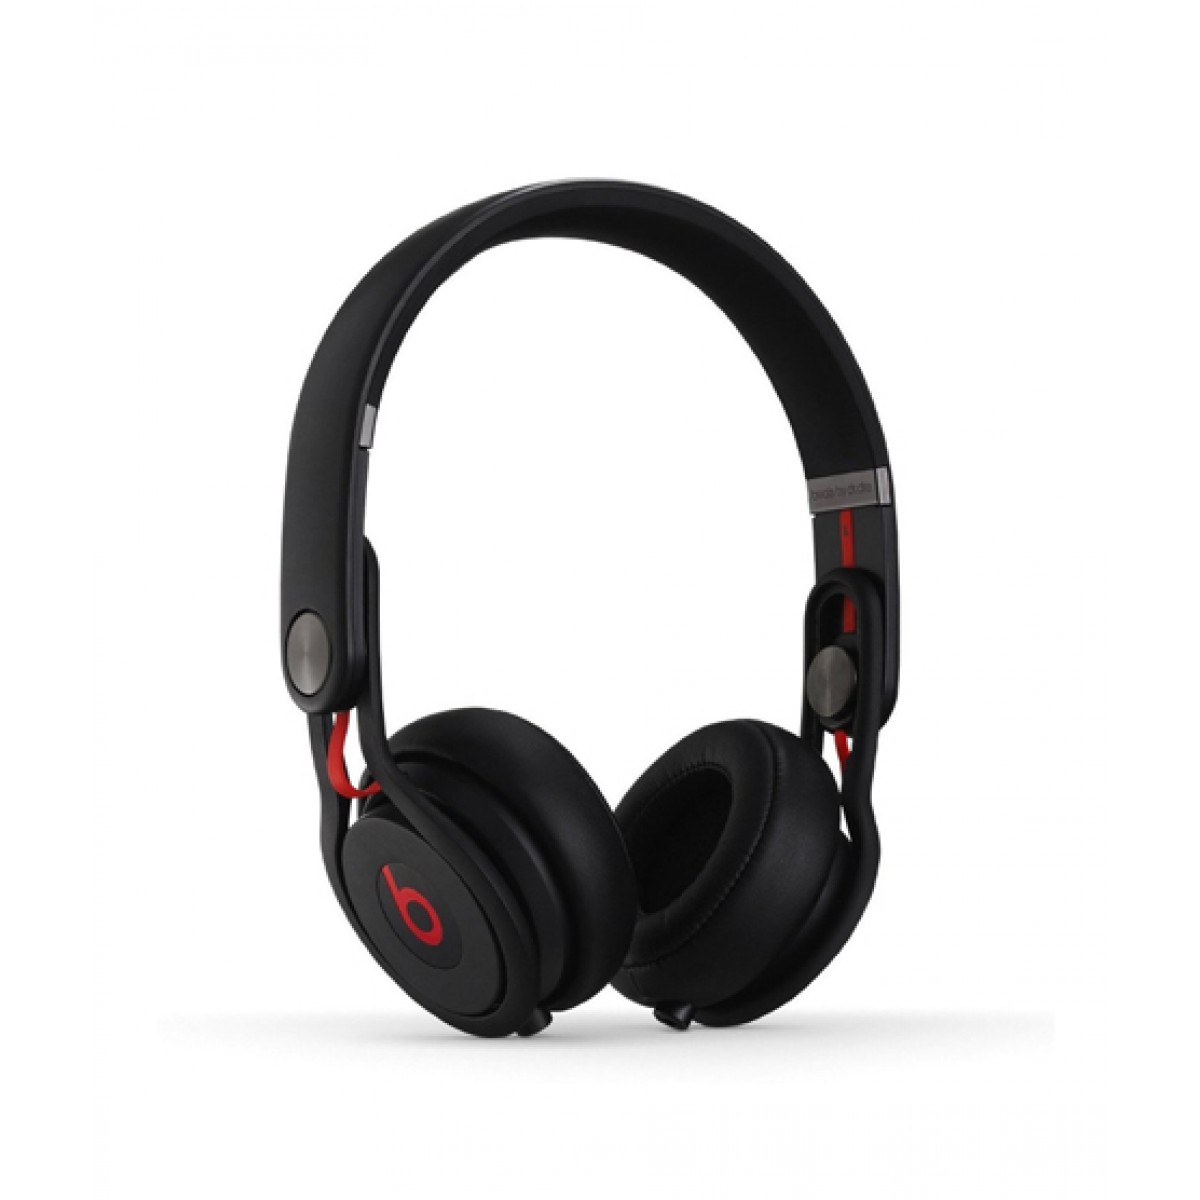 Beats Mixr Wired On-Ear Headphone User Manual